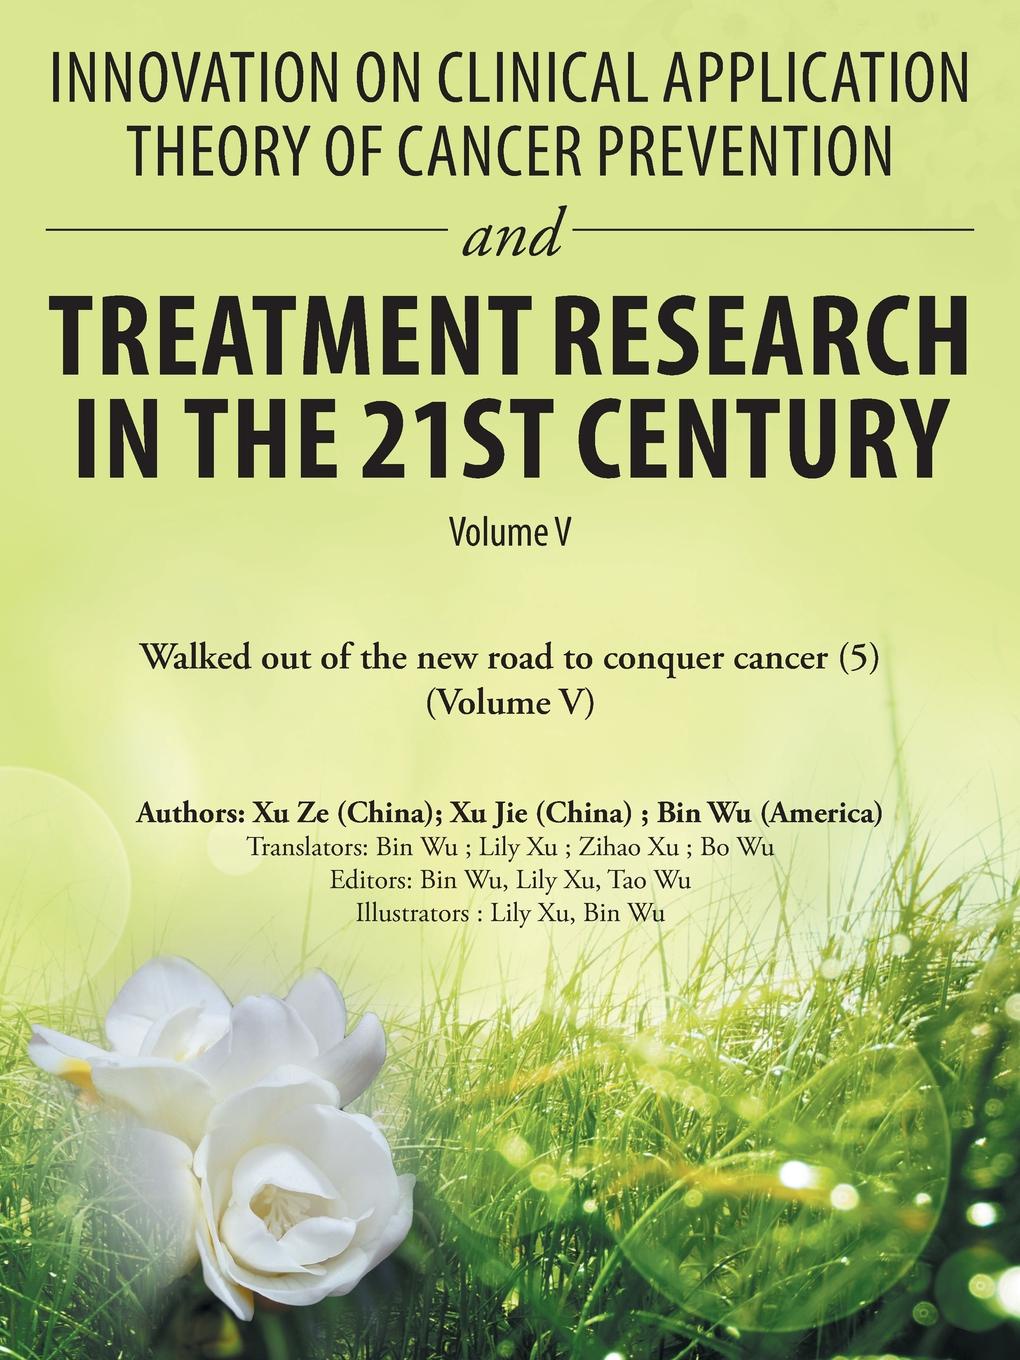 Innovation on Clinical Application Theory of Cancer Prevention and Treatment Research in the 21St Century. Volume V